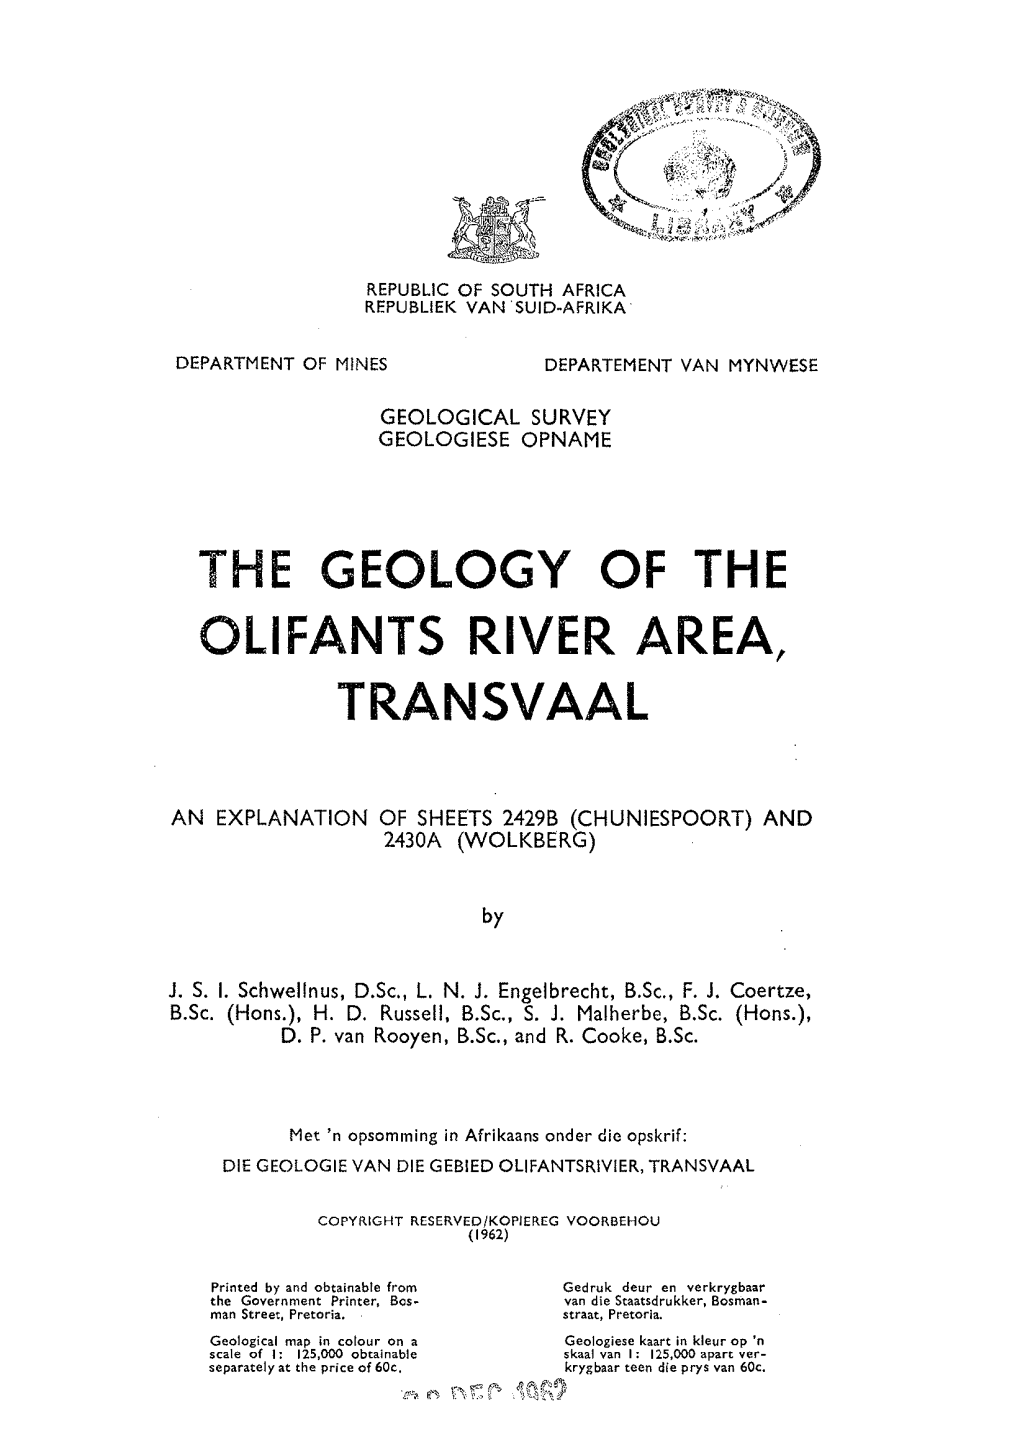 The Geology of the Olifants River Area, Transvaal